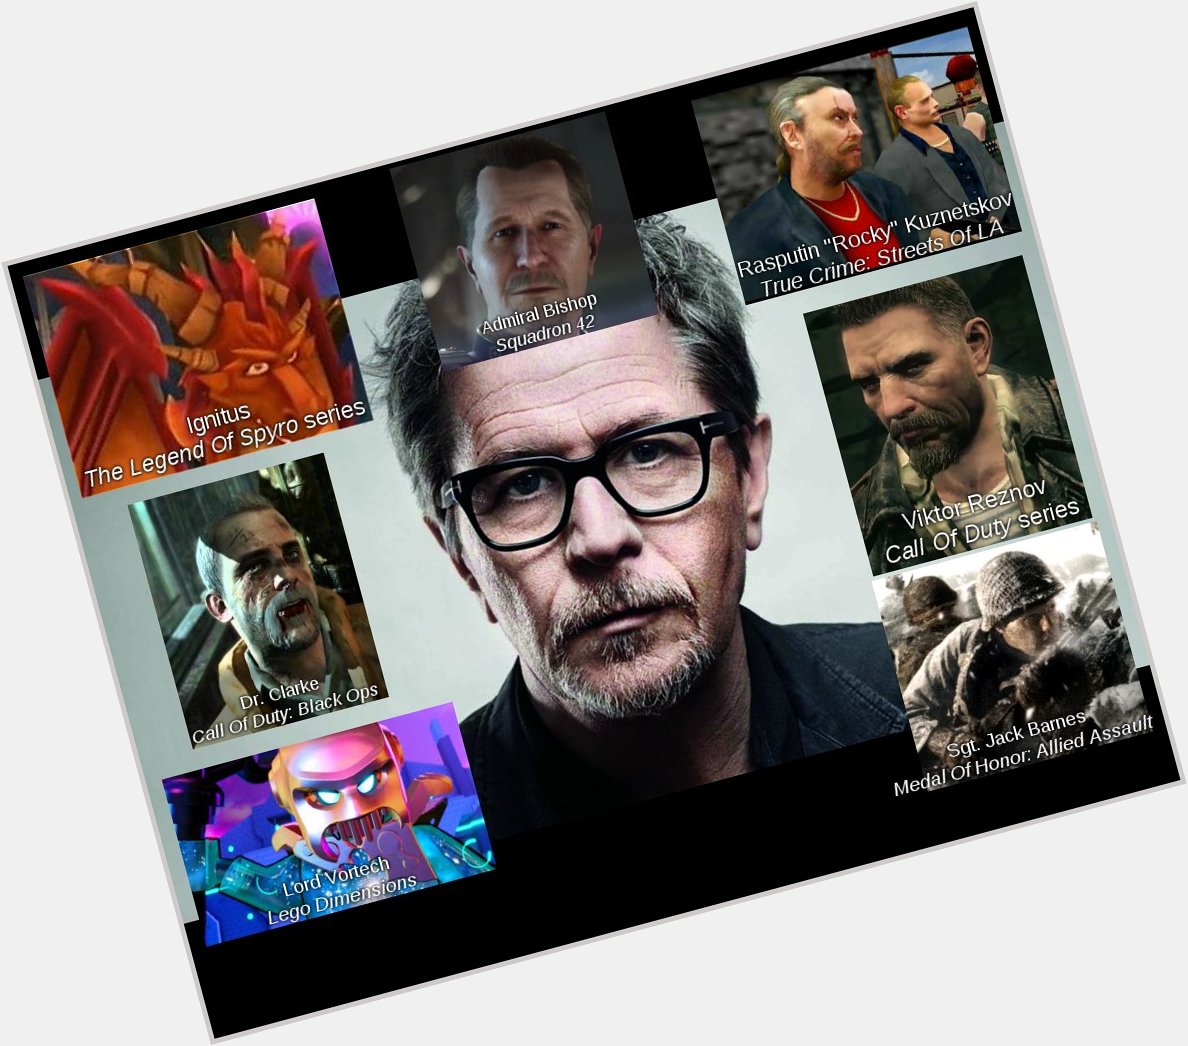 Happy 61st Birthday Gary Oldman! Thank you for your contributions to gaming! 